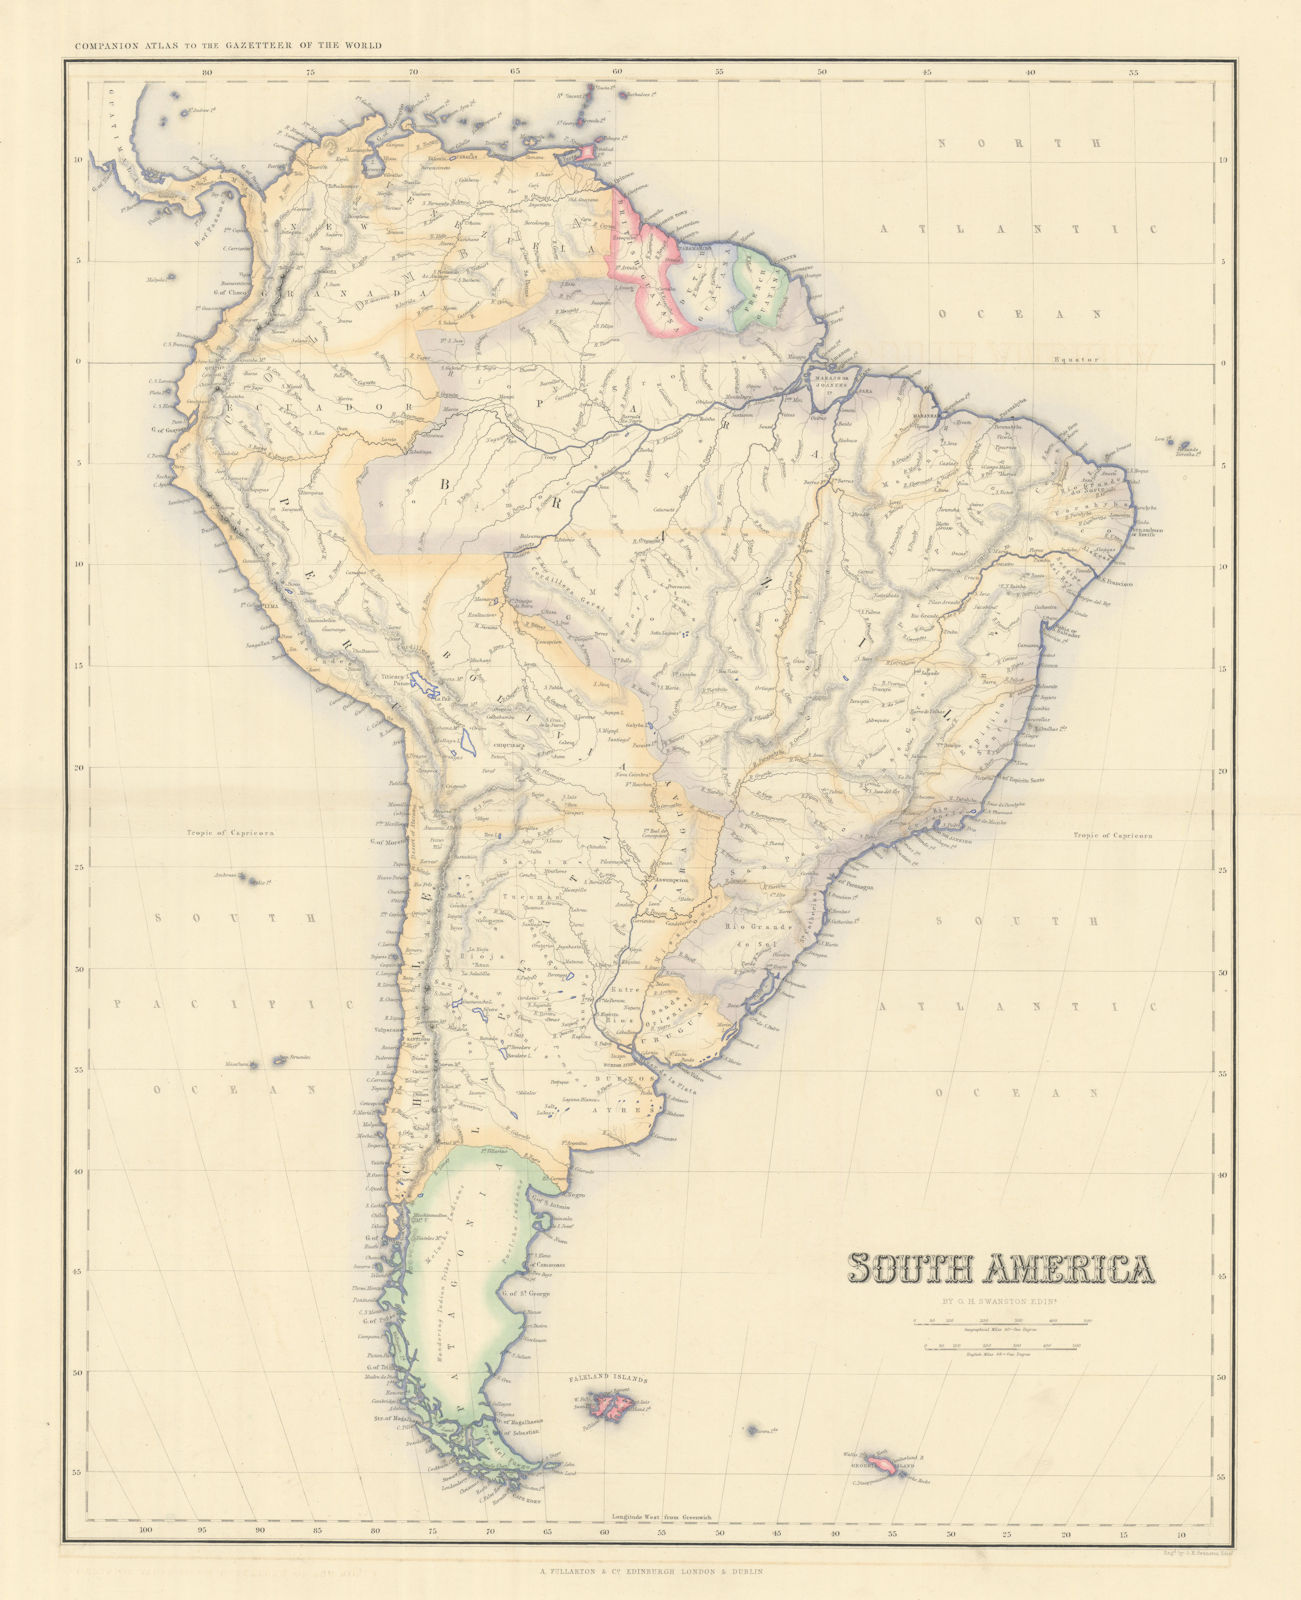 South America by George Heriot SWANSTON 1860 old antique map plan chart